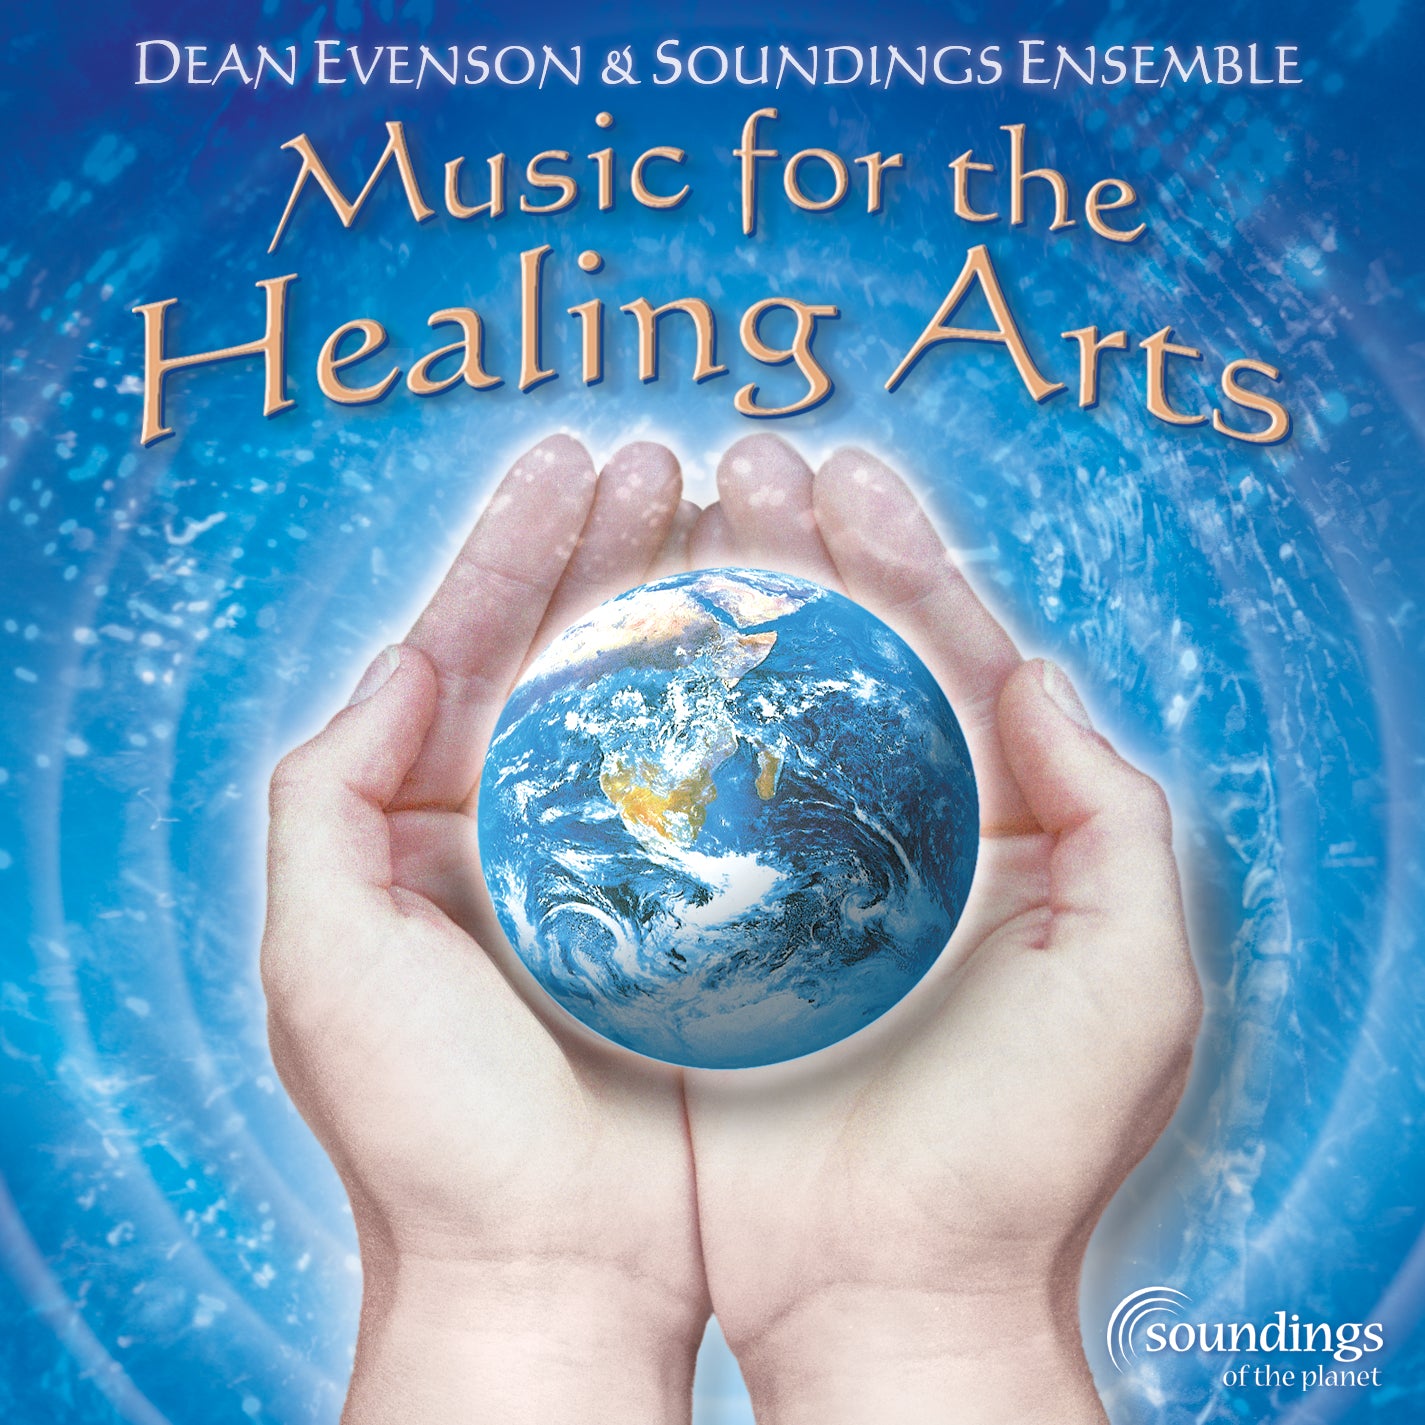 music for the healing arts_Dean Evenson and Soundings Ensemble